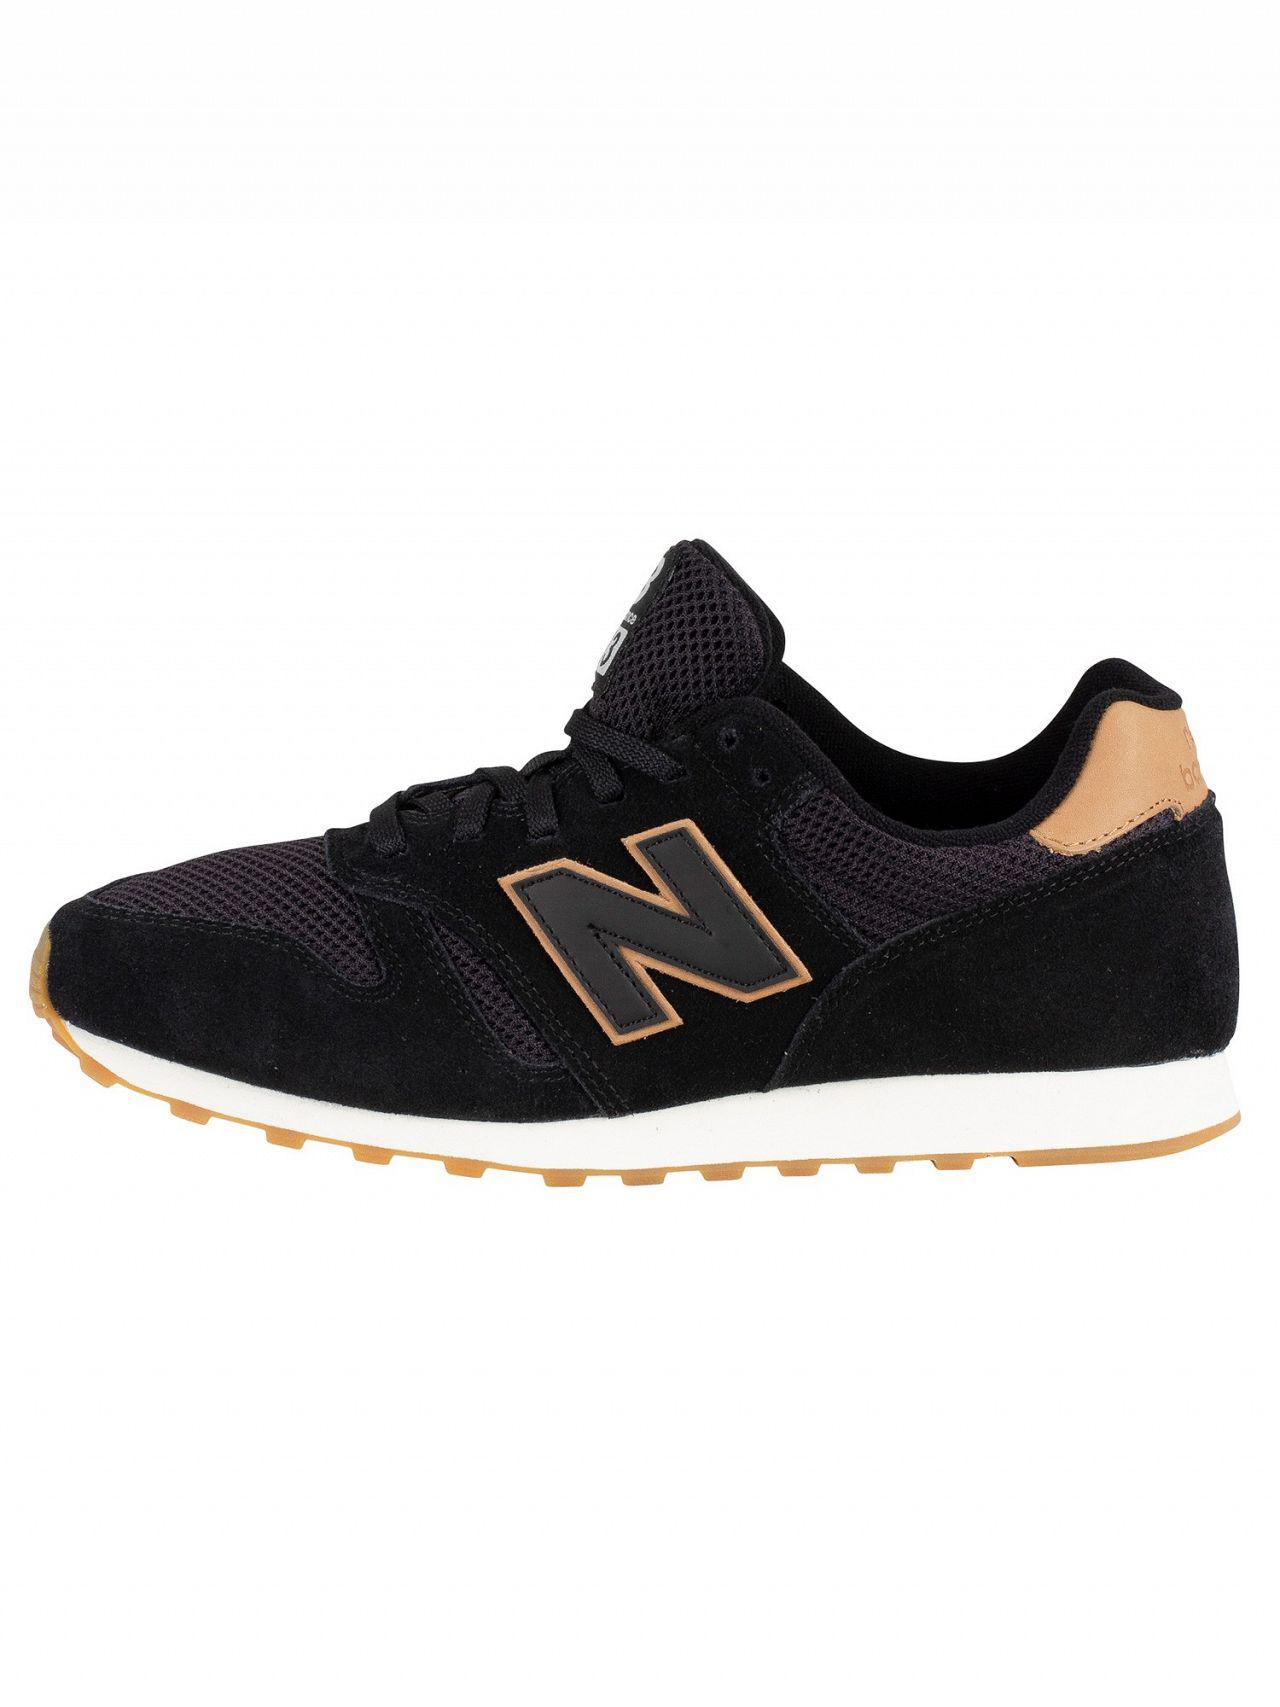 New Balance Black/tan 373 Suede Trainers for Men | Lyst